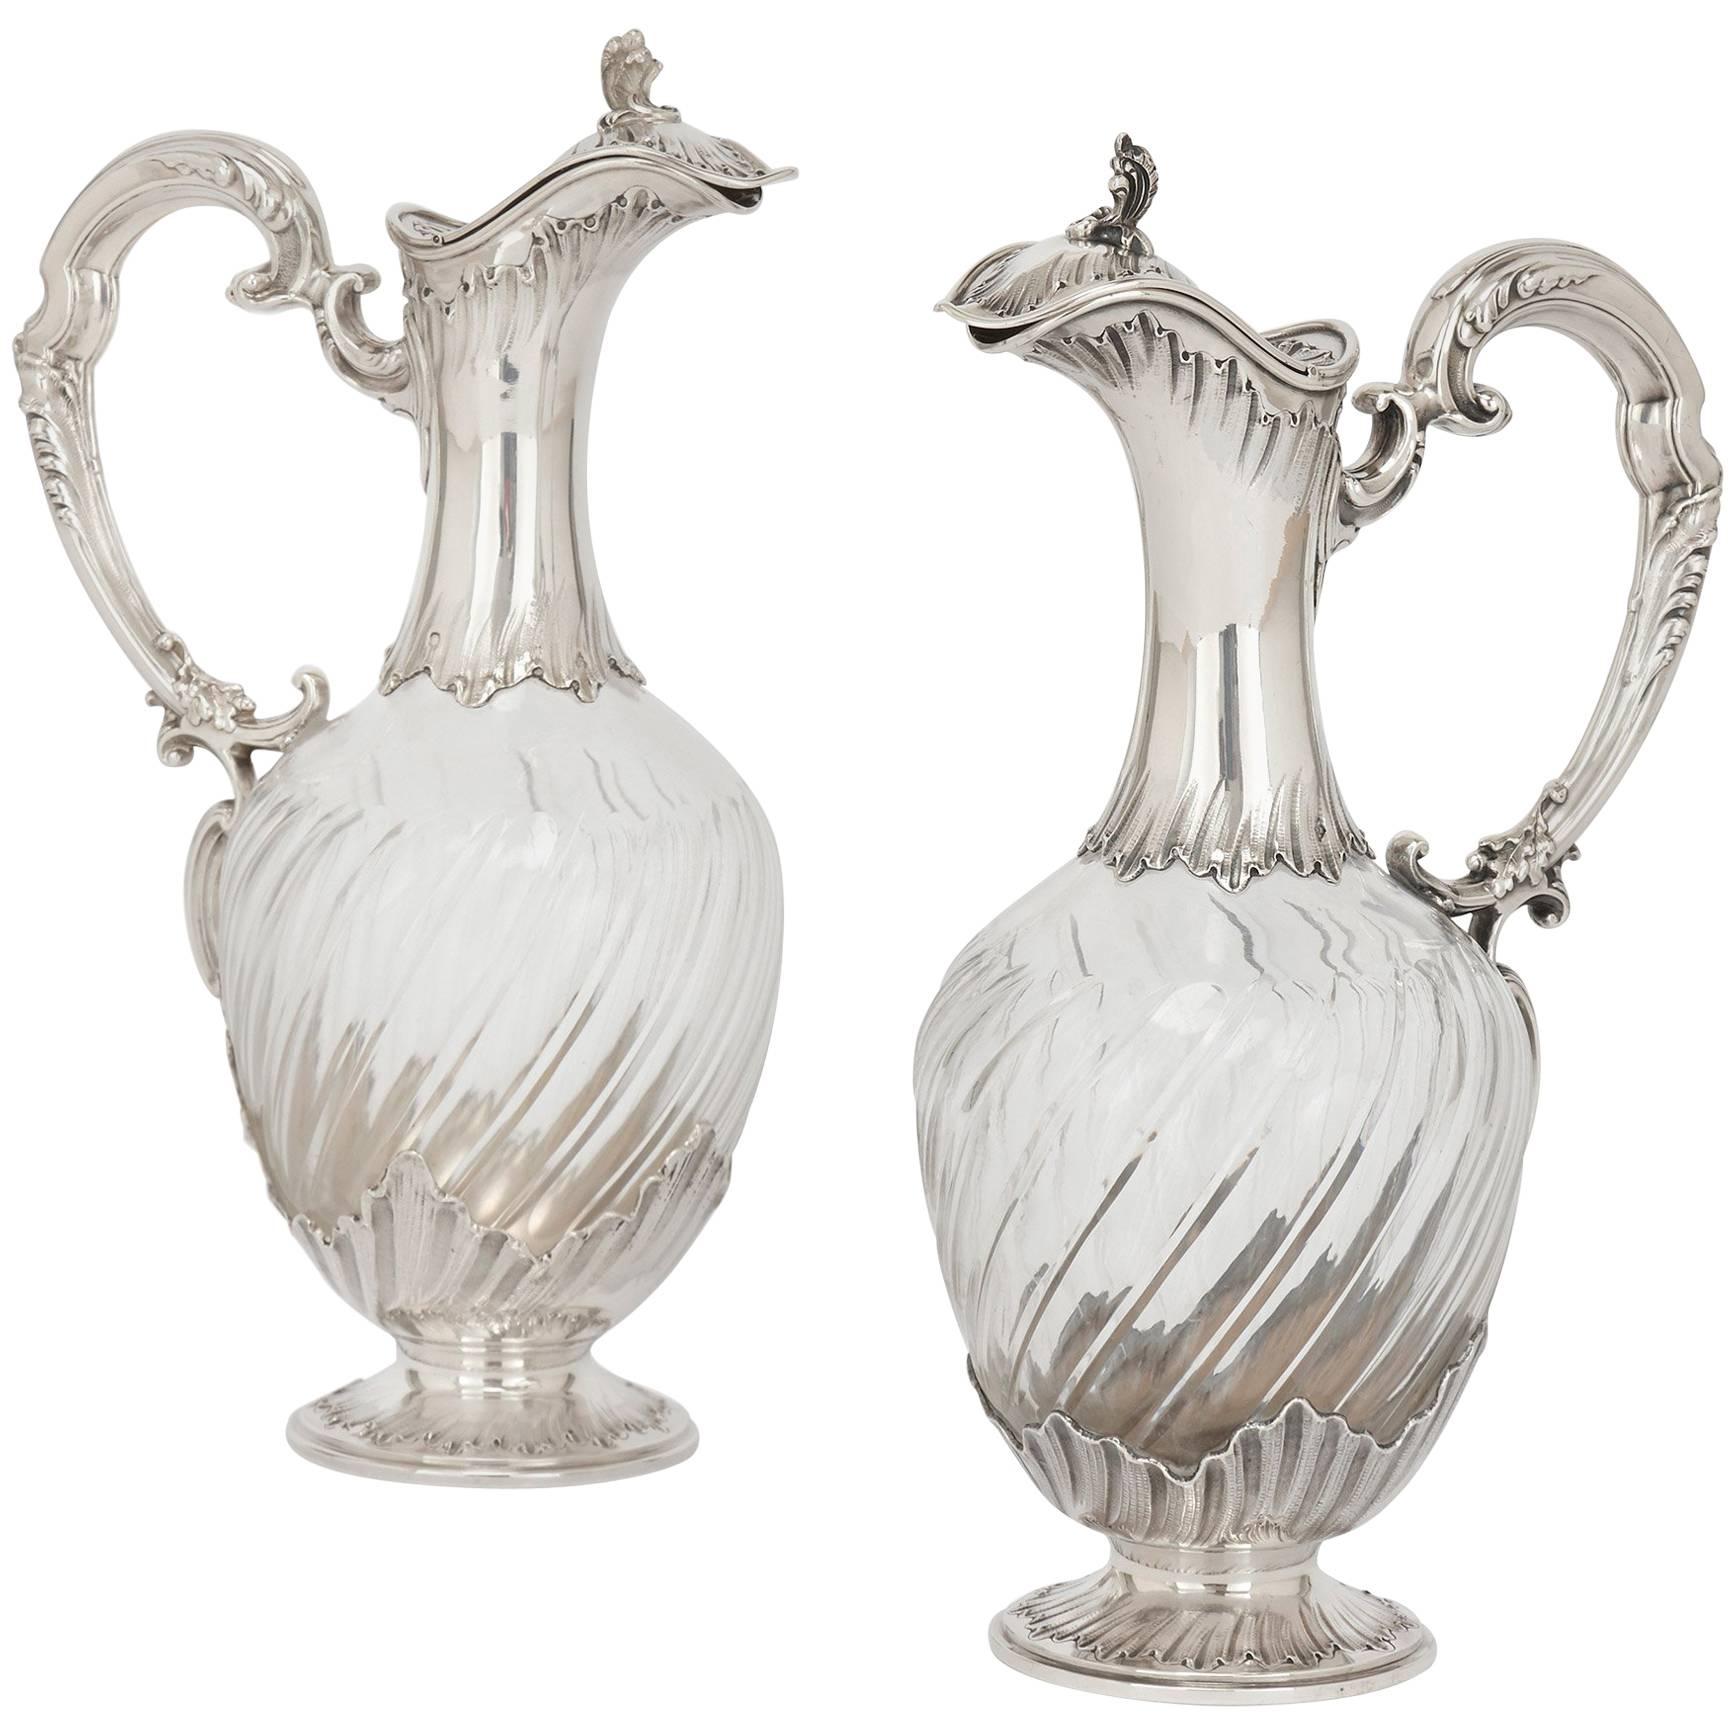 Pair of 19th Century French Silver and Crystal Claret Jugs by Henri Soufflot